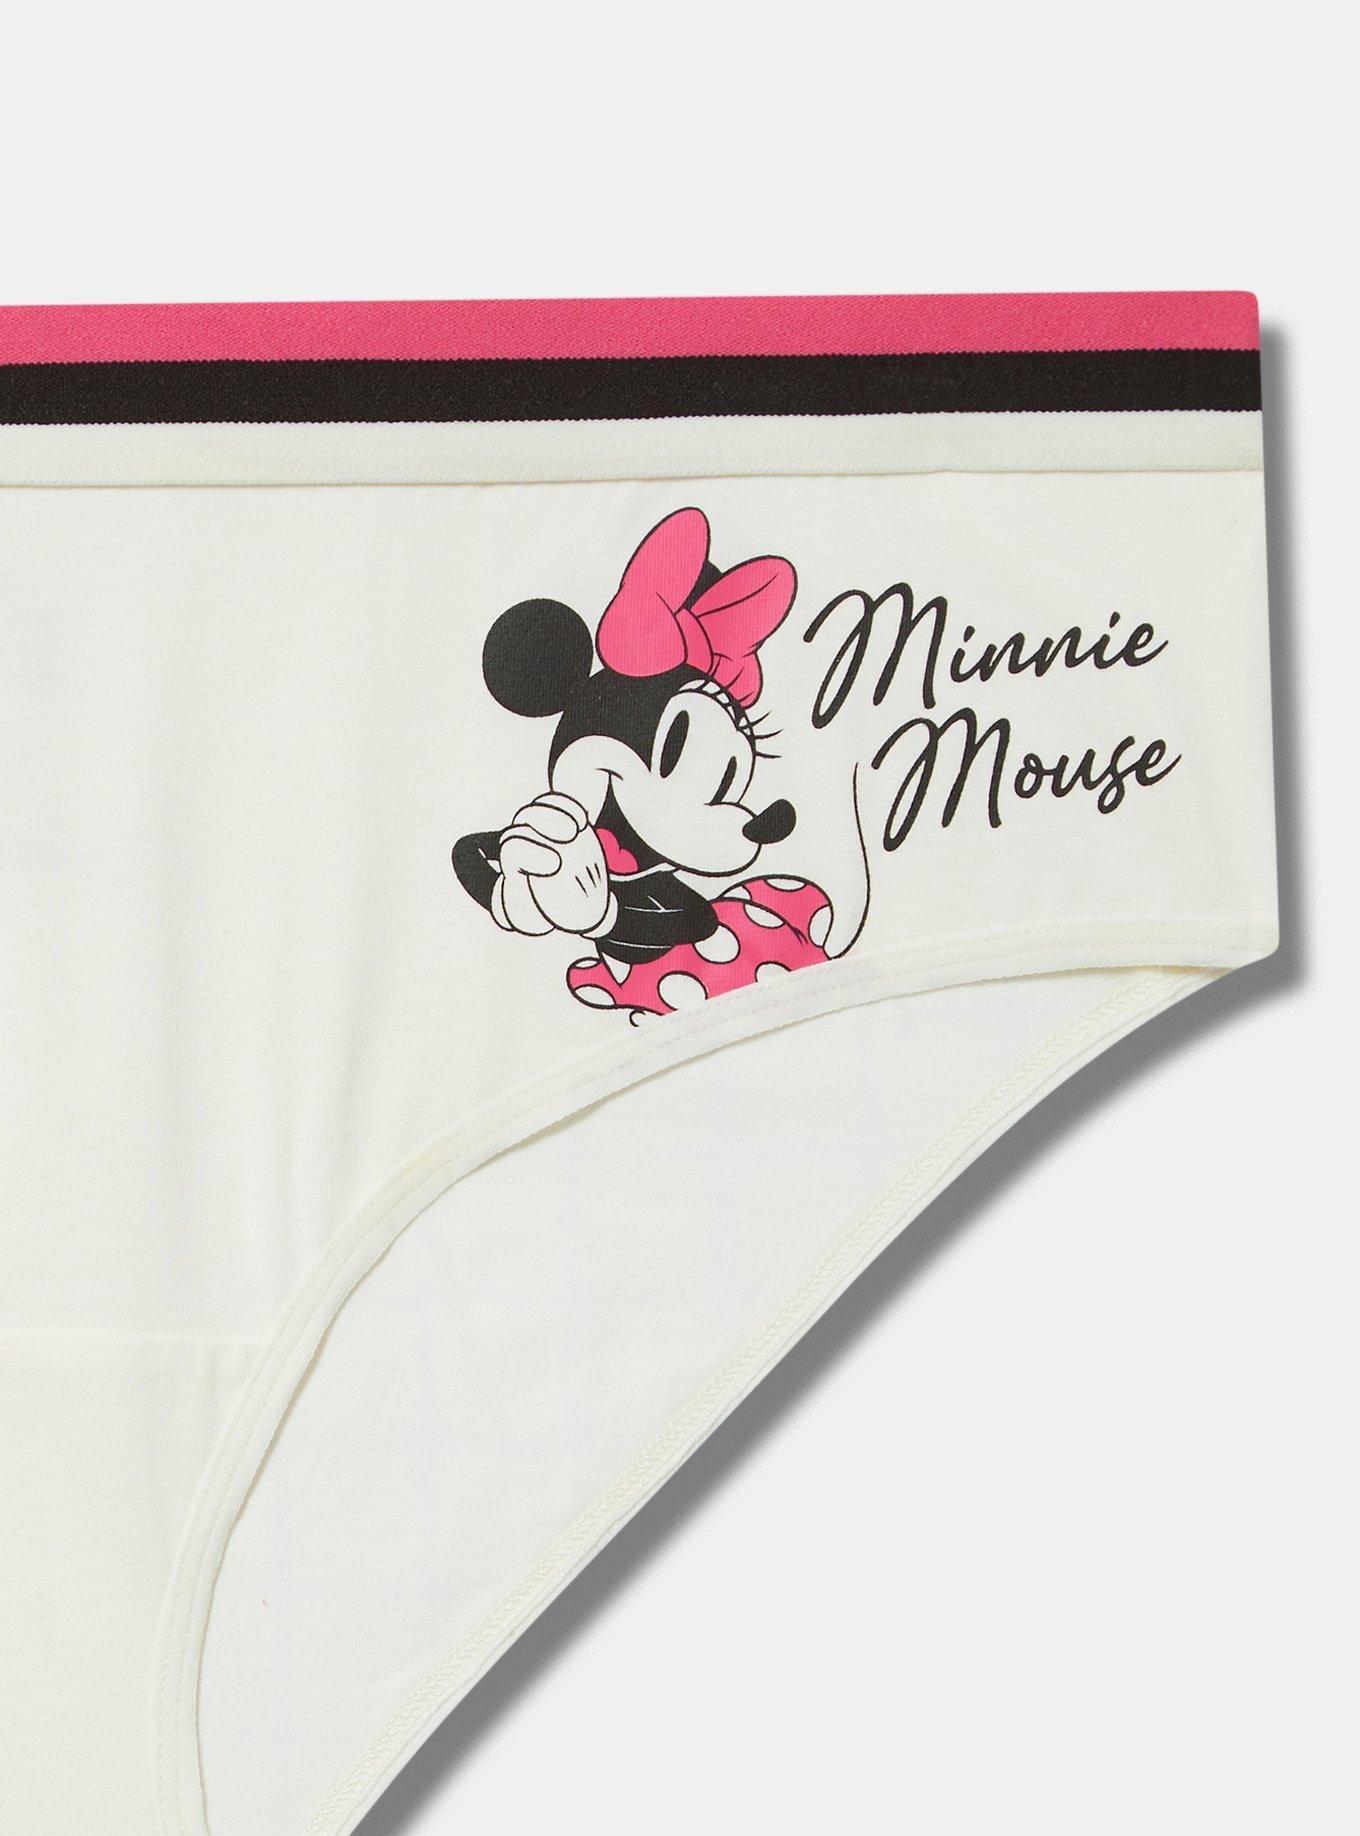 Shop Minnie Mouse Printed Hipster Briefs Online